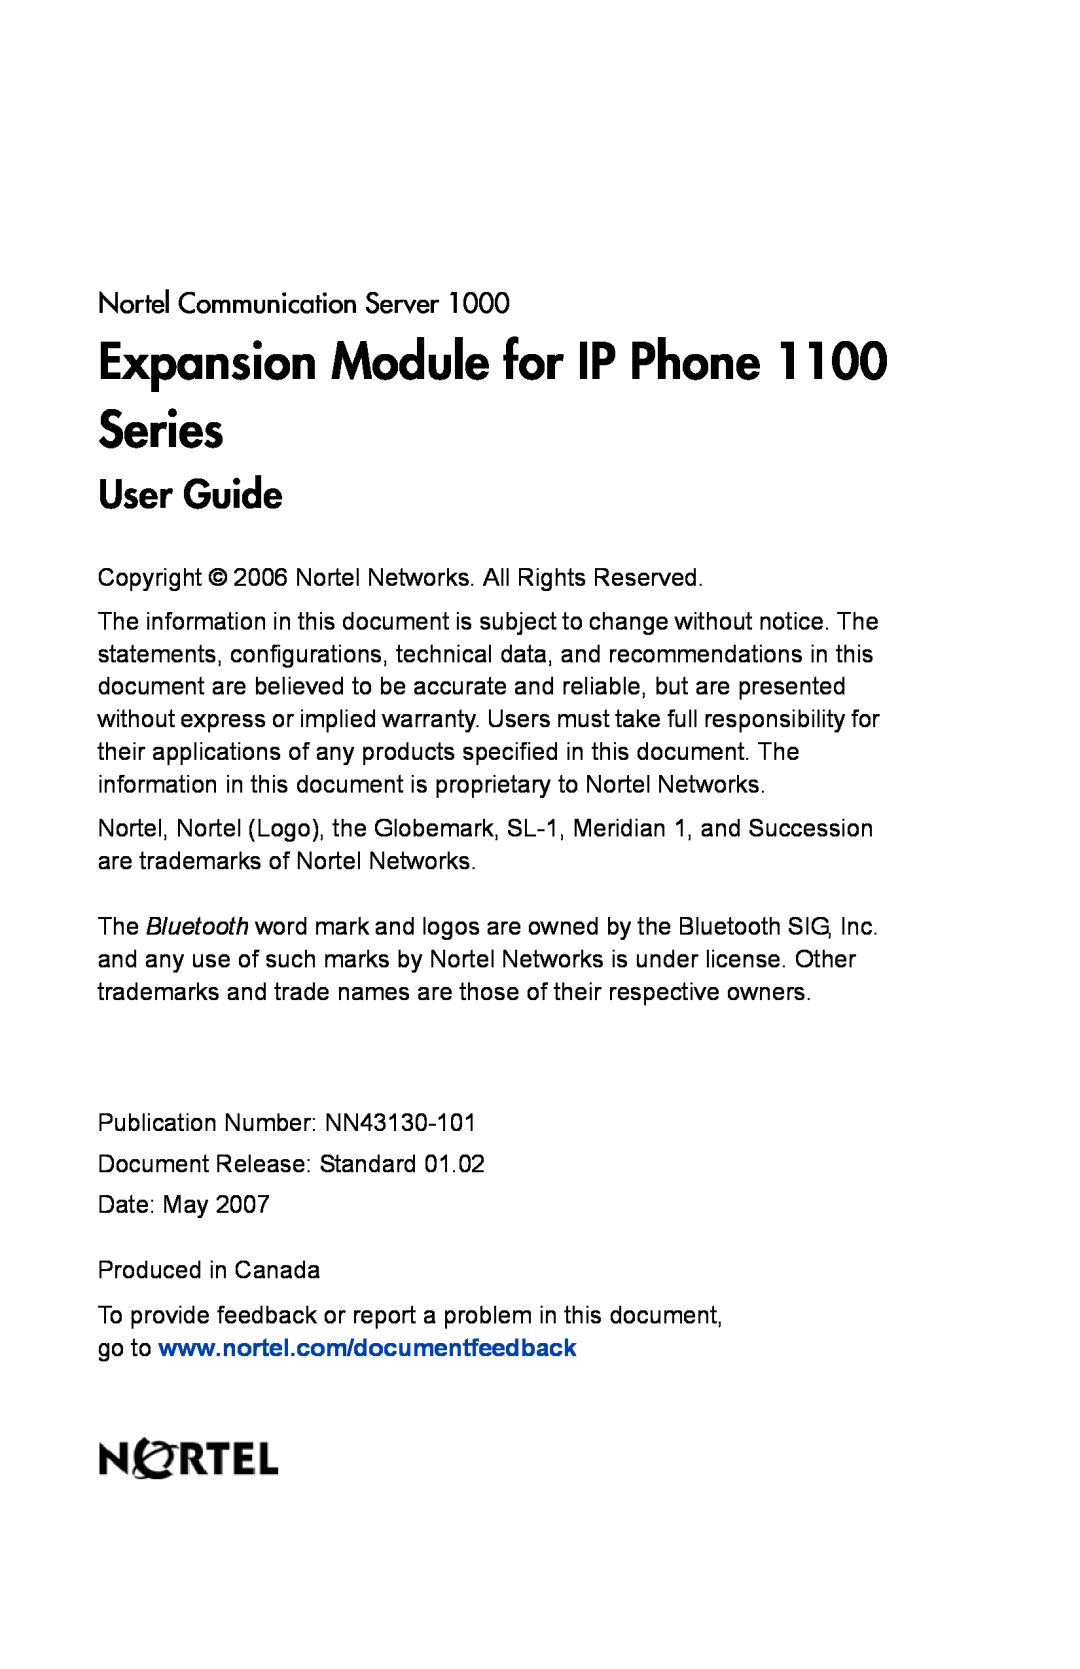 Nortel Networks manual Expansion Module for IP Phone 1100 Series, User Guide, Produced in Canada 